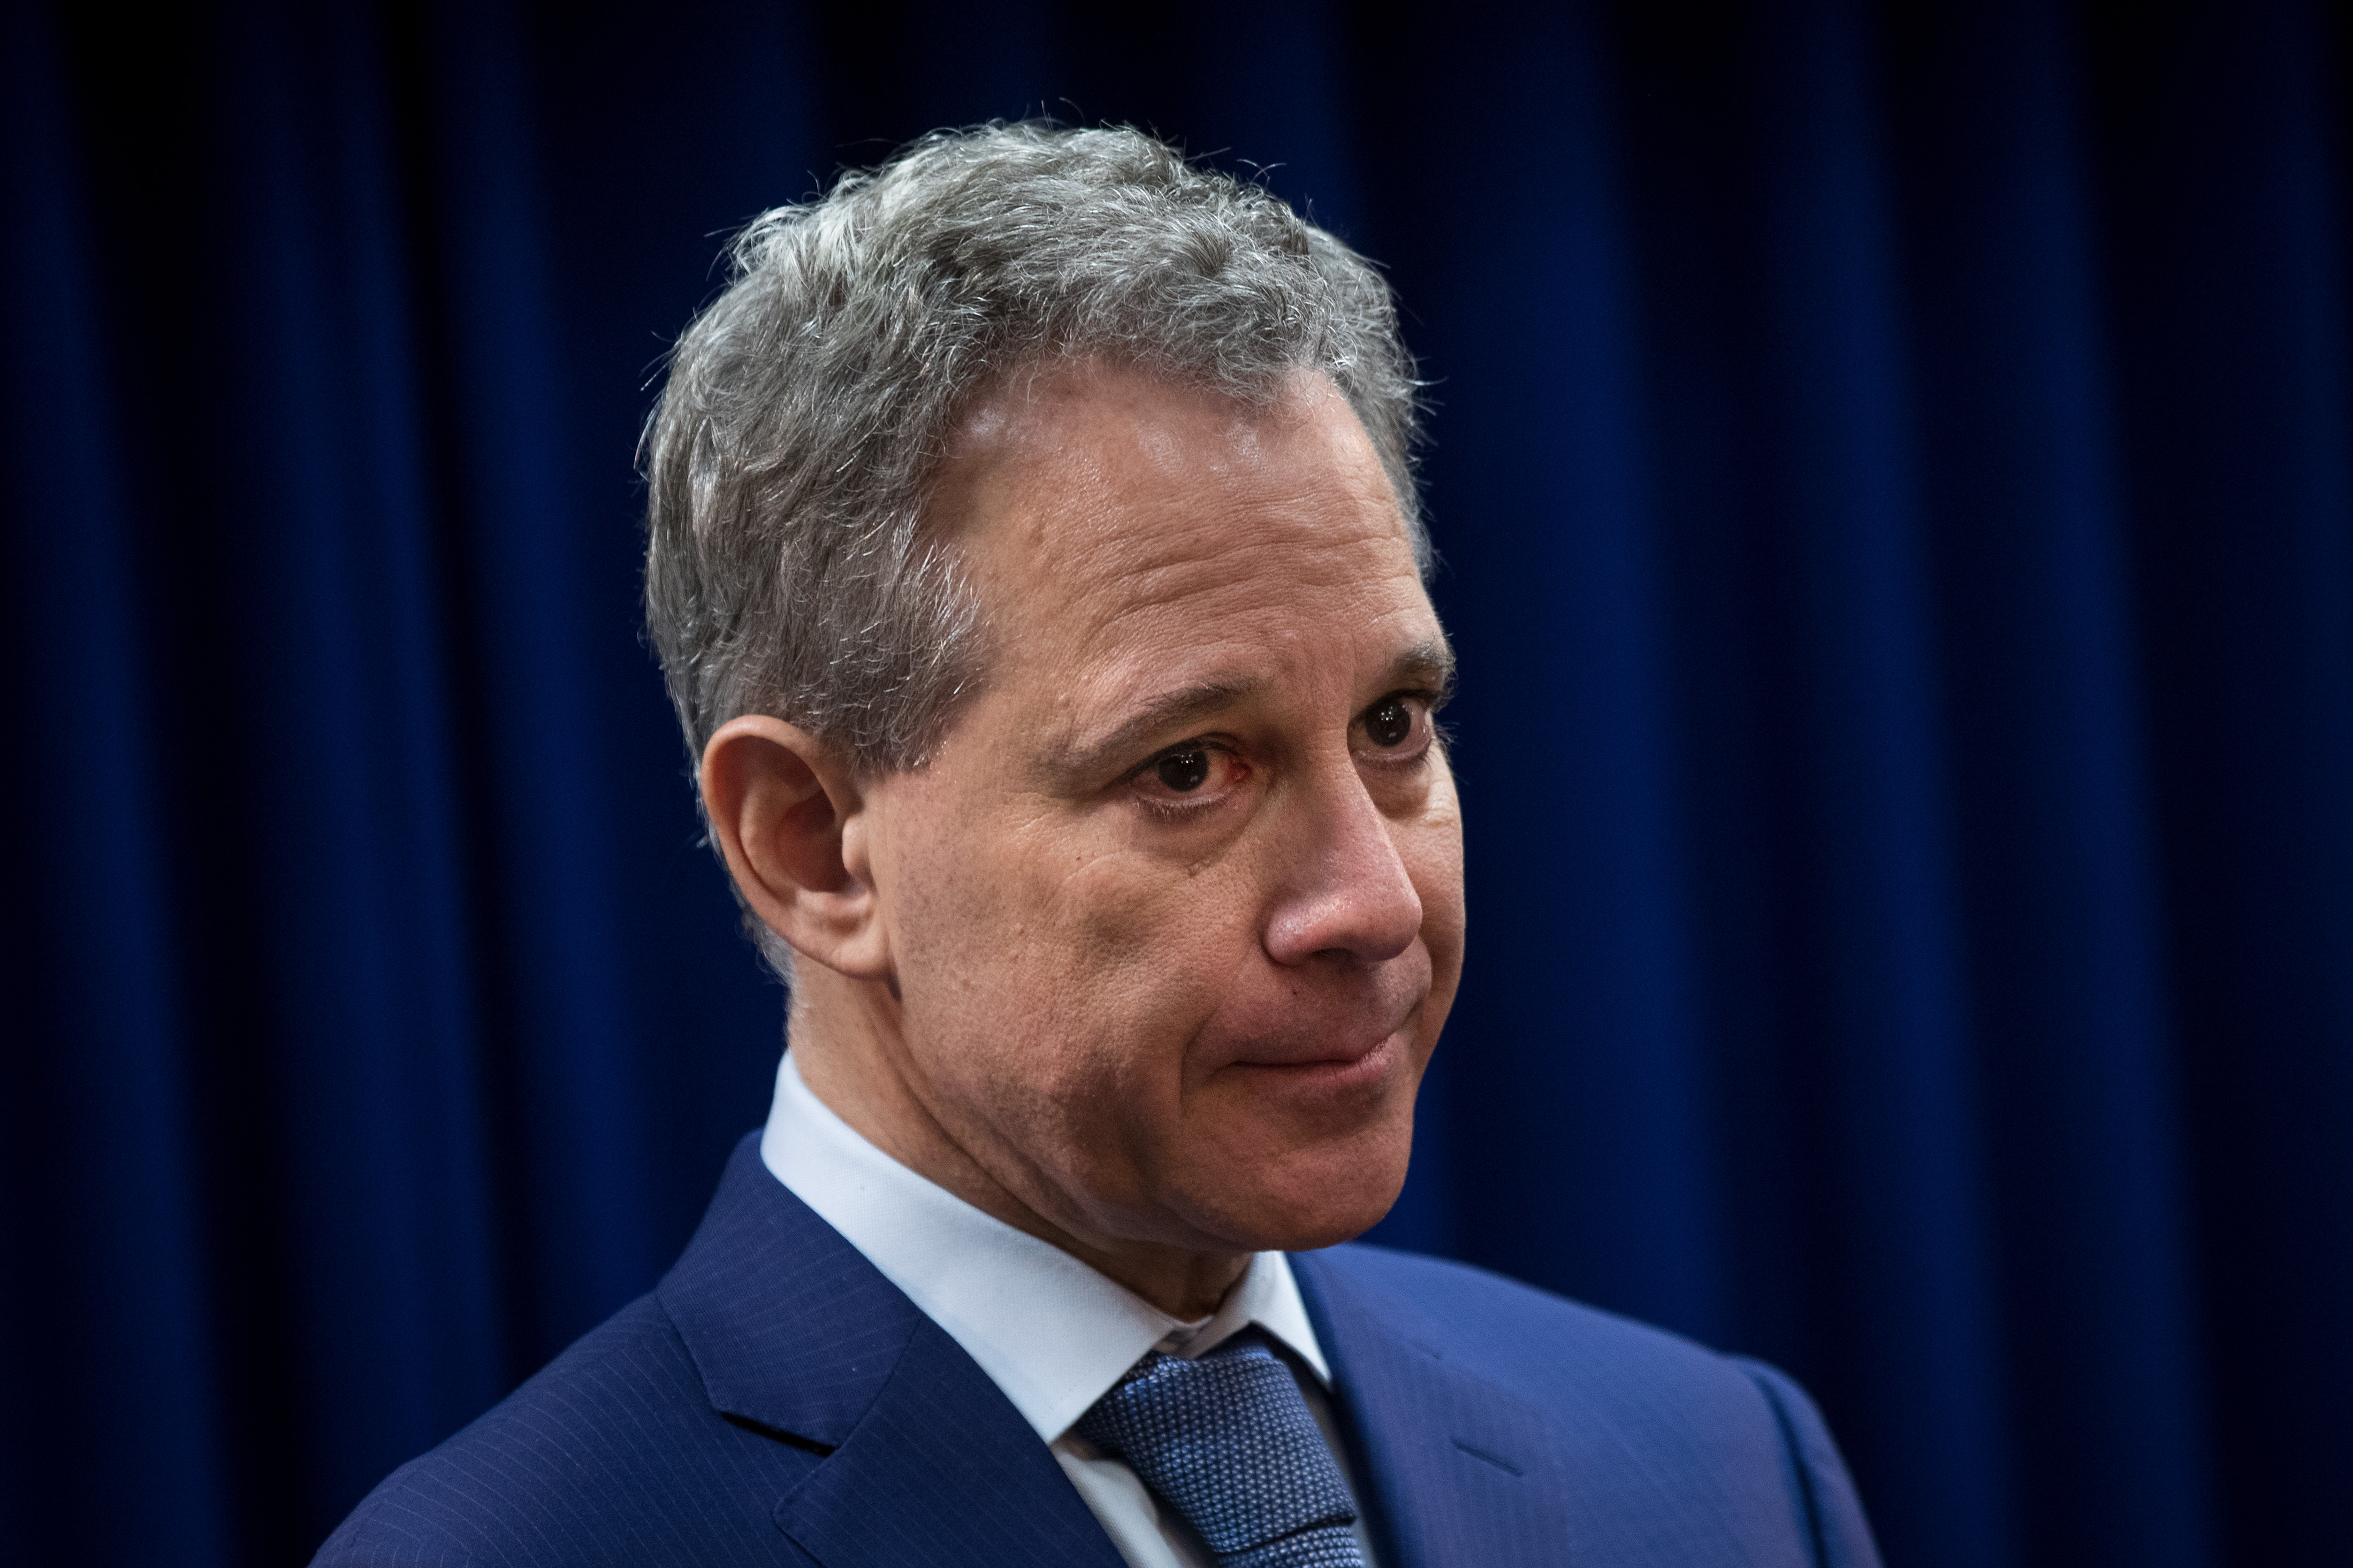 New York State Attorney General Eric Schneiderman looks on during a press conference to call for an end of Immigration and Customs Enforcement (ICE) raids in New York state courts on Aug. 3, 2017 in the Brooklyn borough of New York City. (Drew Angerer/Getty Images)